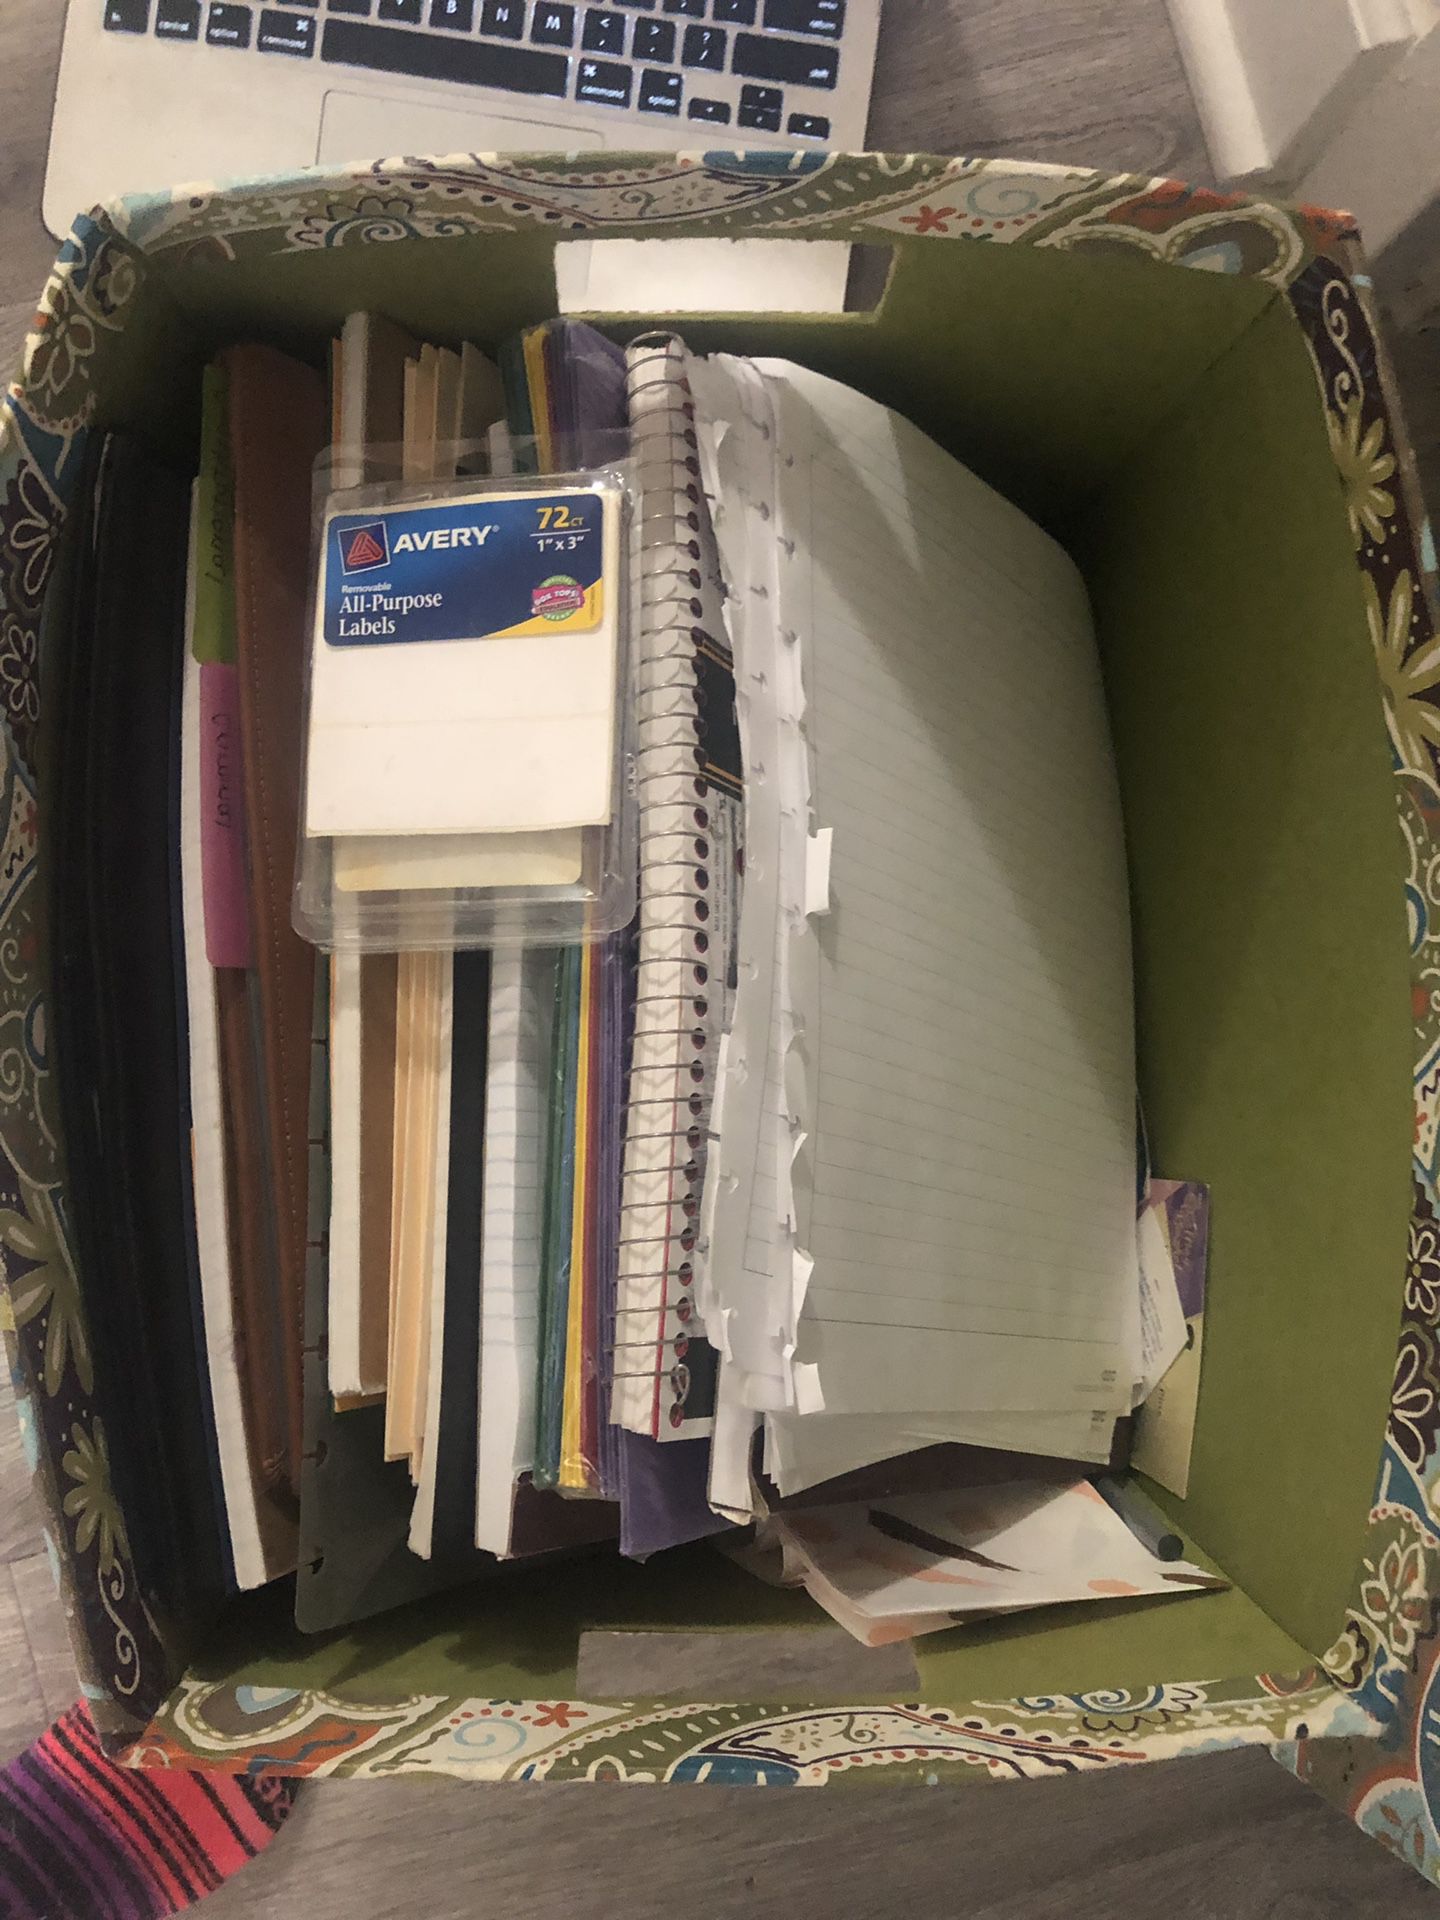 MUST GO SUN 3/31 school and office supplies including unused notebooks and folders